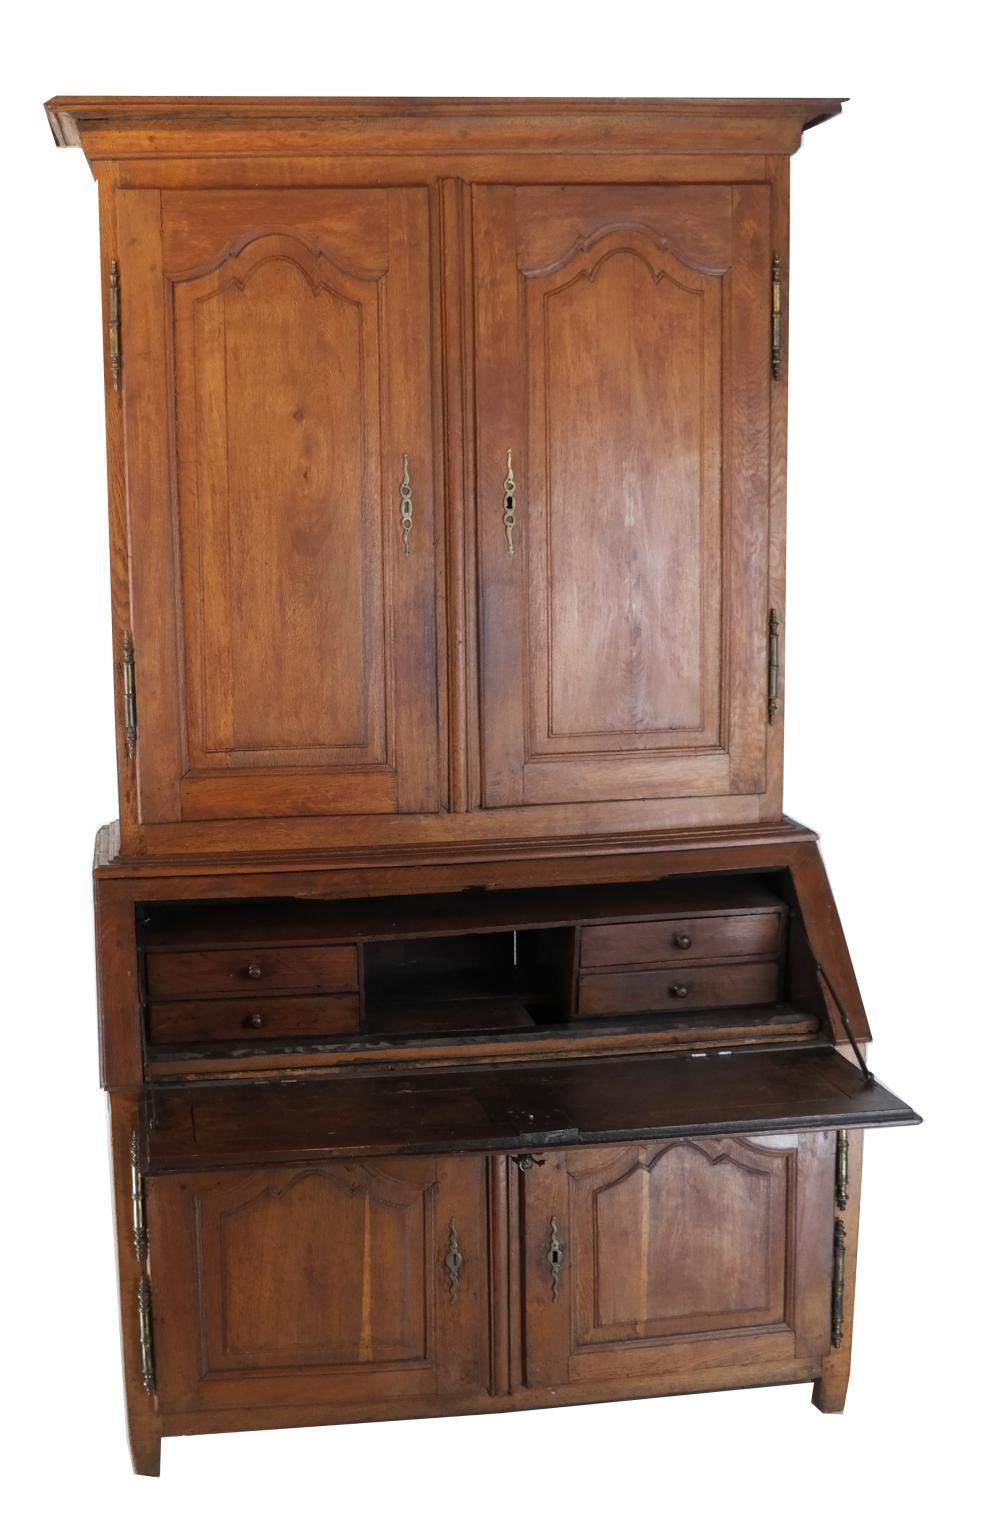 A French 2-part secretaire desk with upper bookcase, circa 1770 in oak, with nicely paneled doors and a fitted interior desk compartment.